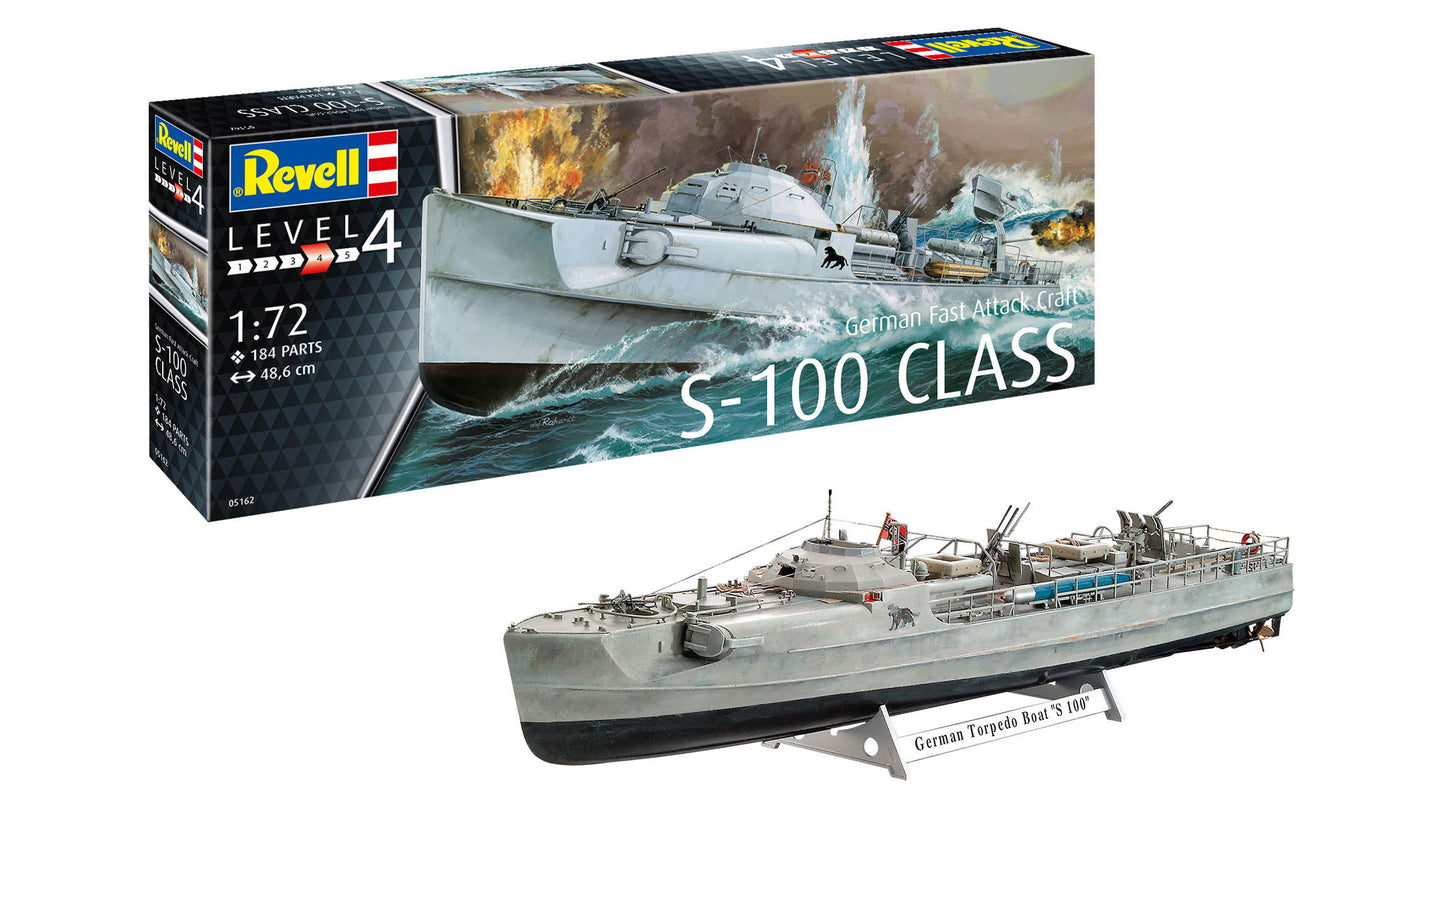 GERMAN FAST ATTACK CRAFT S-100 - REVELL 05162